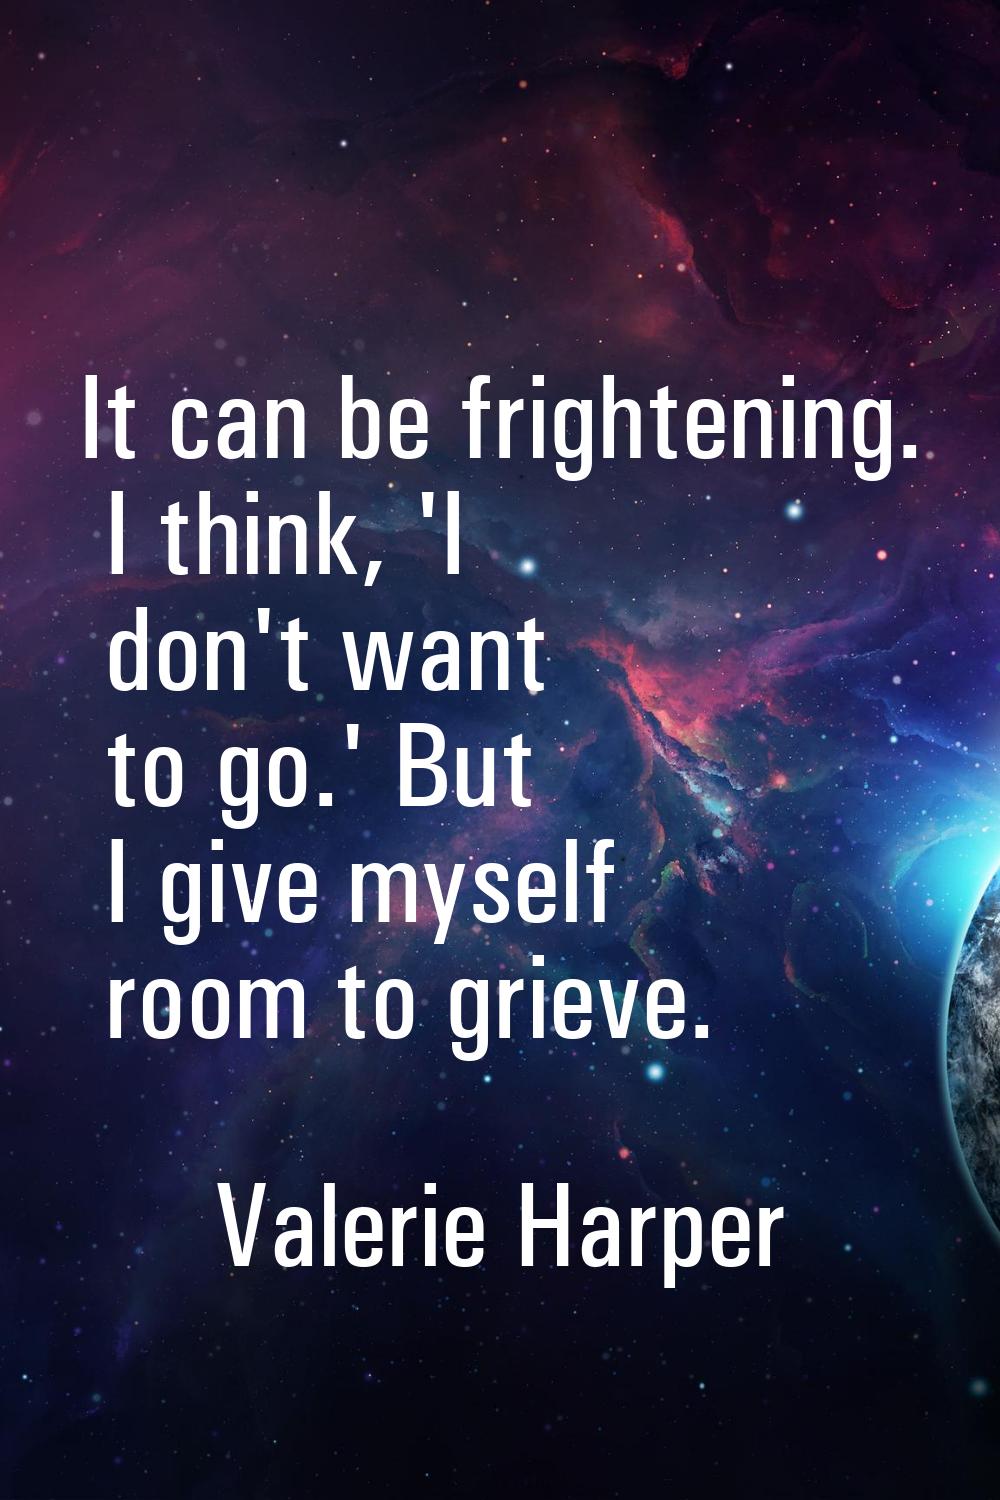 It can be frightening. I think, 'I don't want to go.' But I give myself room to grieve.